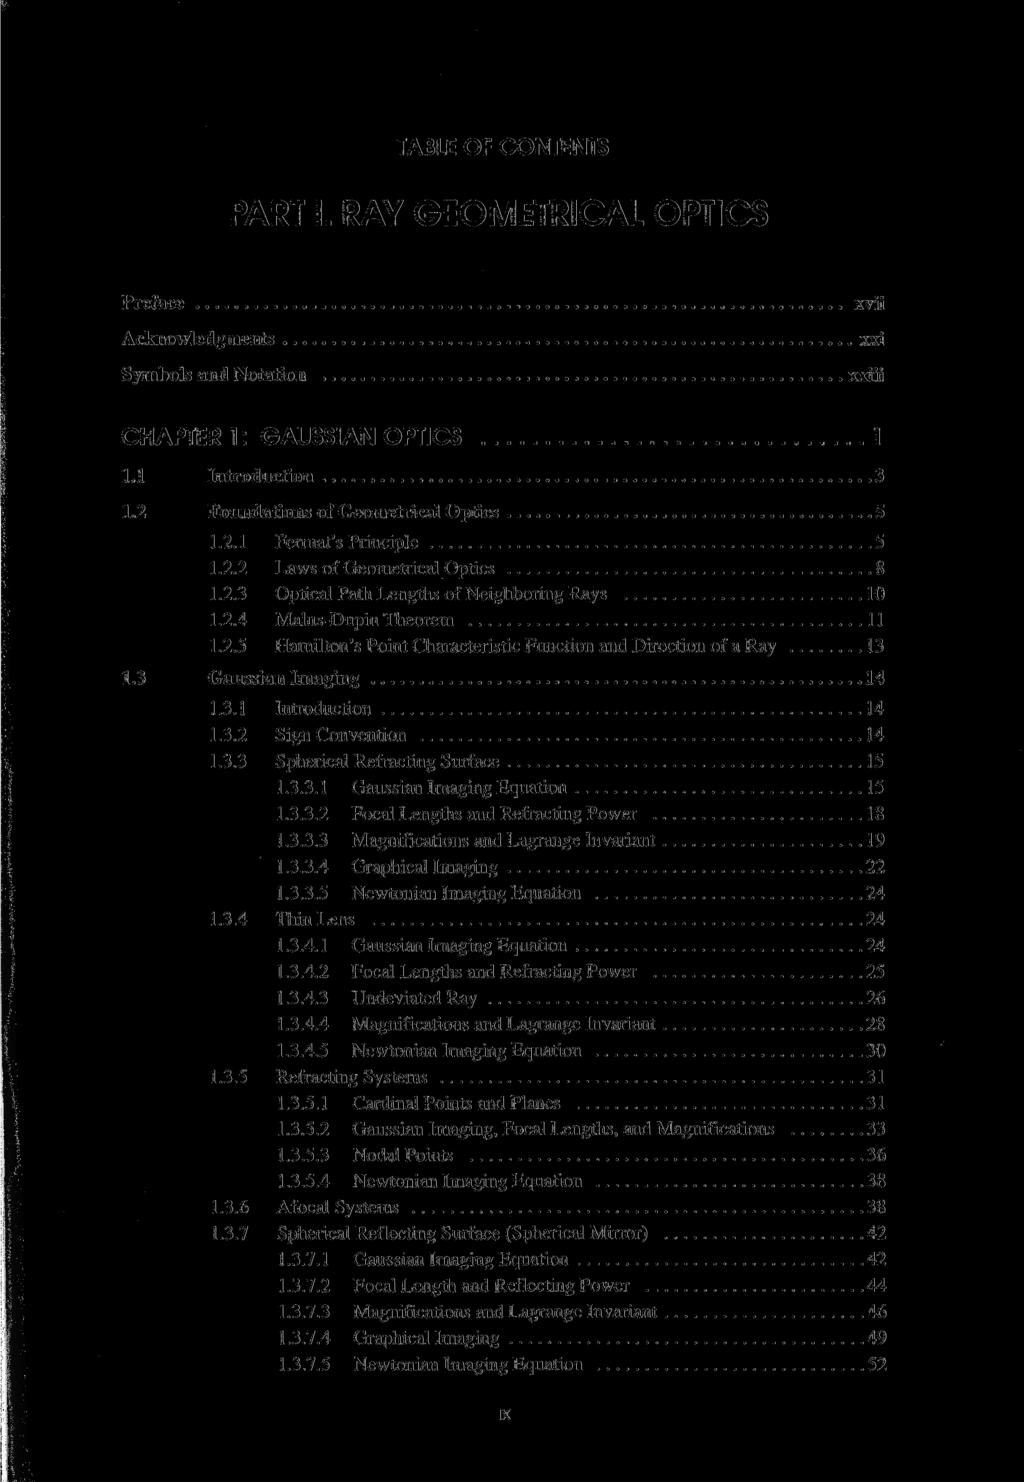 TABLE OF CONTENTS PART I. RAY GEOMETRICAL OPTICS Preface Acknowledgments Symbols and Notation xvii xxi xxiii CHAPTER 1: GAUSSIAN OPTICS 1 1.1 Introduction 3 1.2 Foundations of Geometrical Optics 5 1.